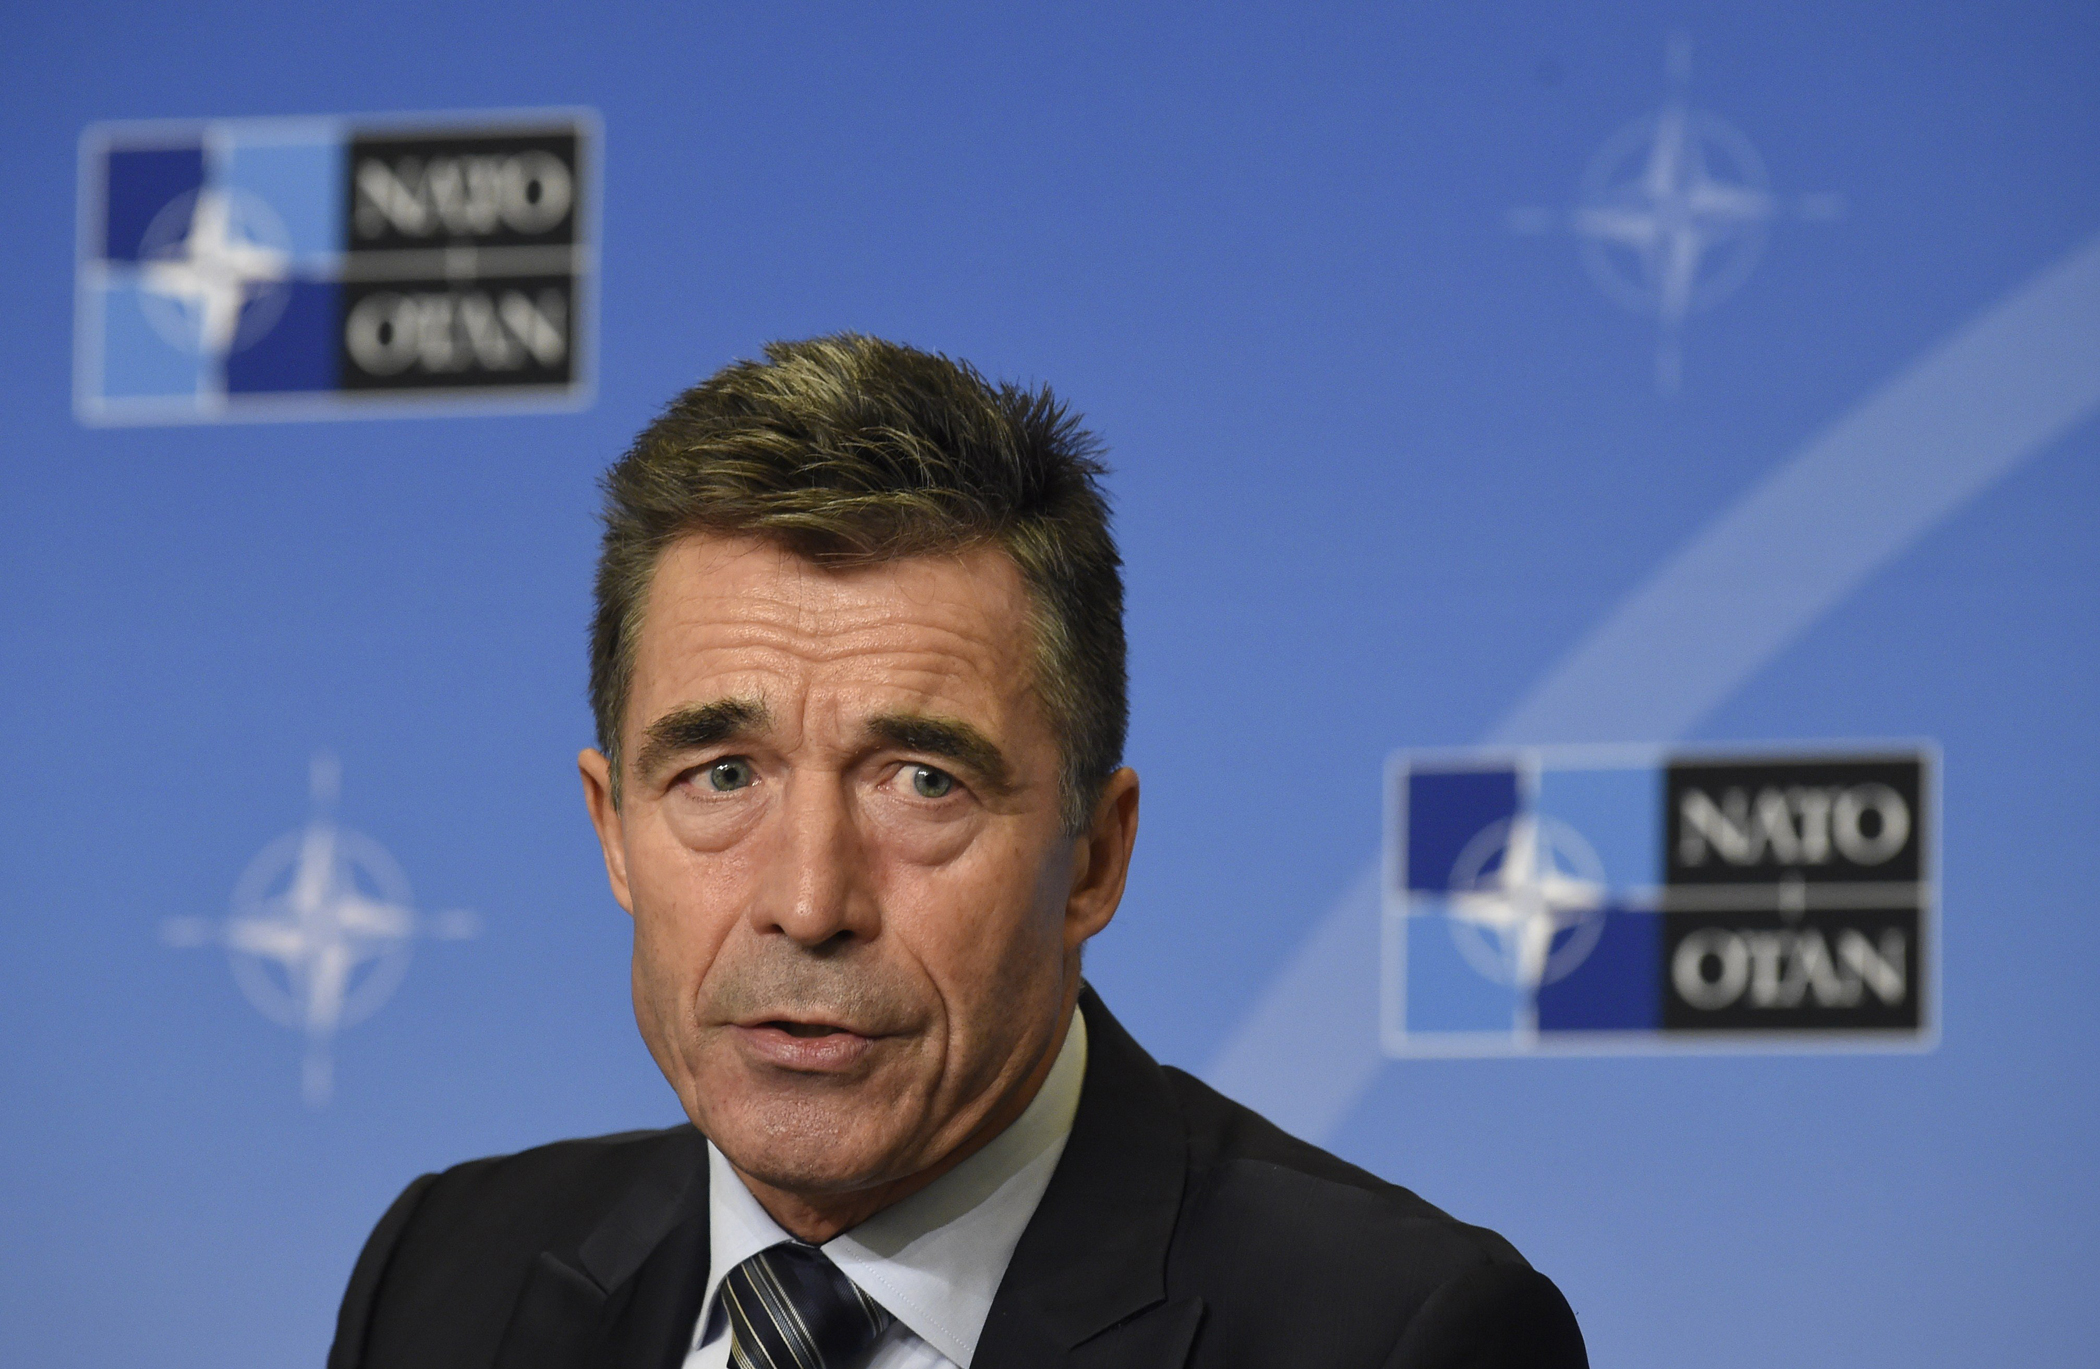 NATO Secretary General Anders Fogh Rasmussen gives a press on Sept. 1, 2014, in Brussels (John Thys—AFP/Getty Images)